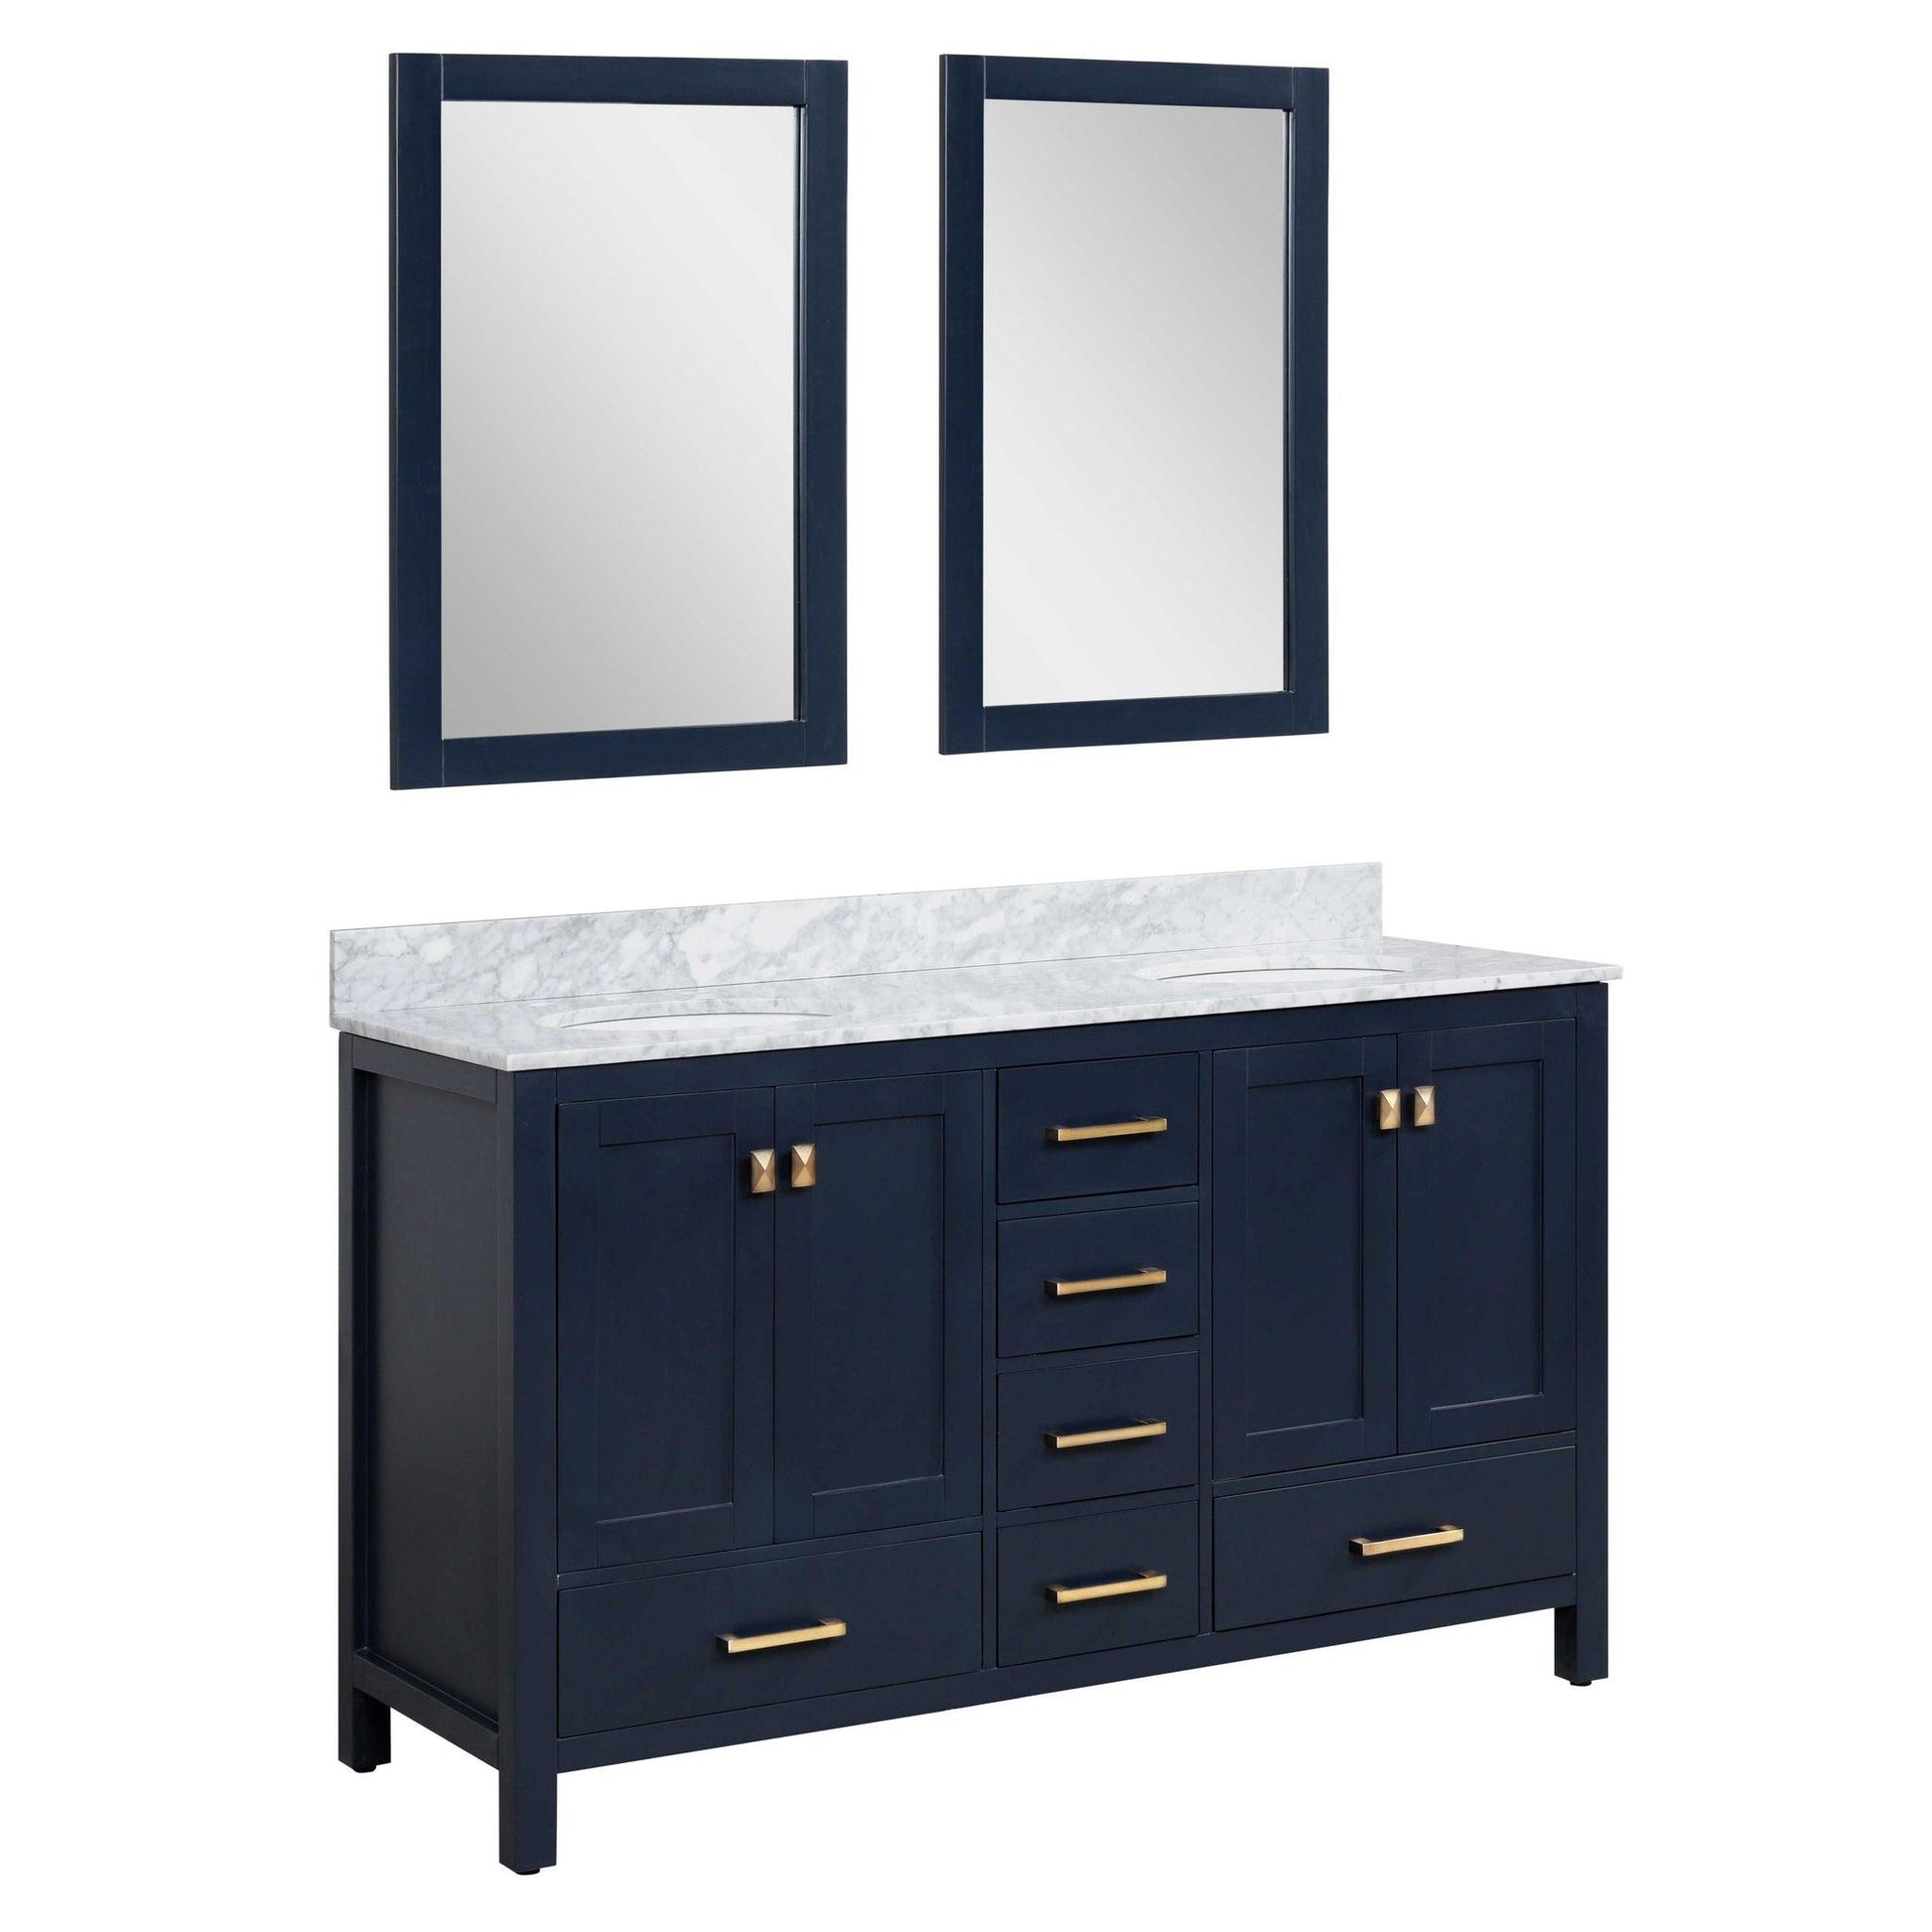 ANZZI Chateau Series 60" x 36" Navy Blue Solid Wood Bathroom Vanity With White Carrara Marble Countertop, Basin Sink and Mirror